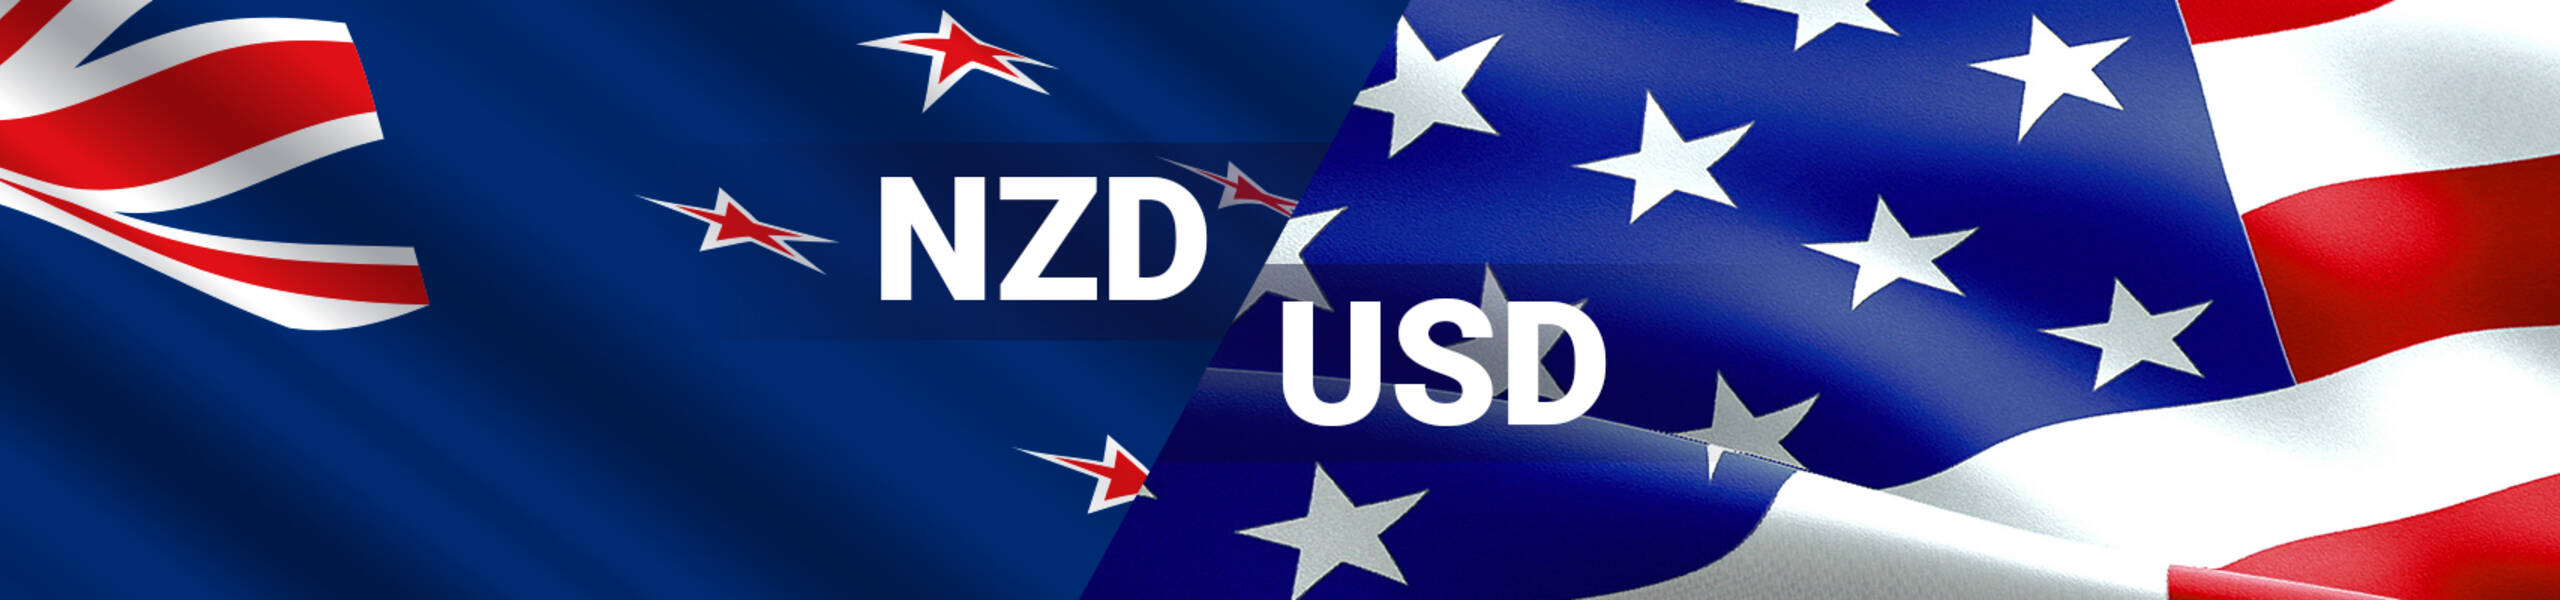 NZD/USD reversed from resistance zone